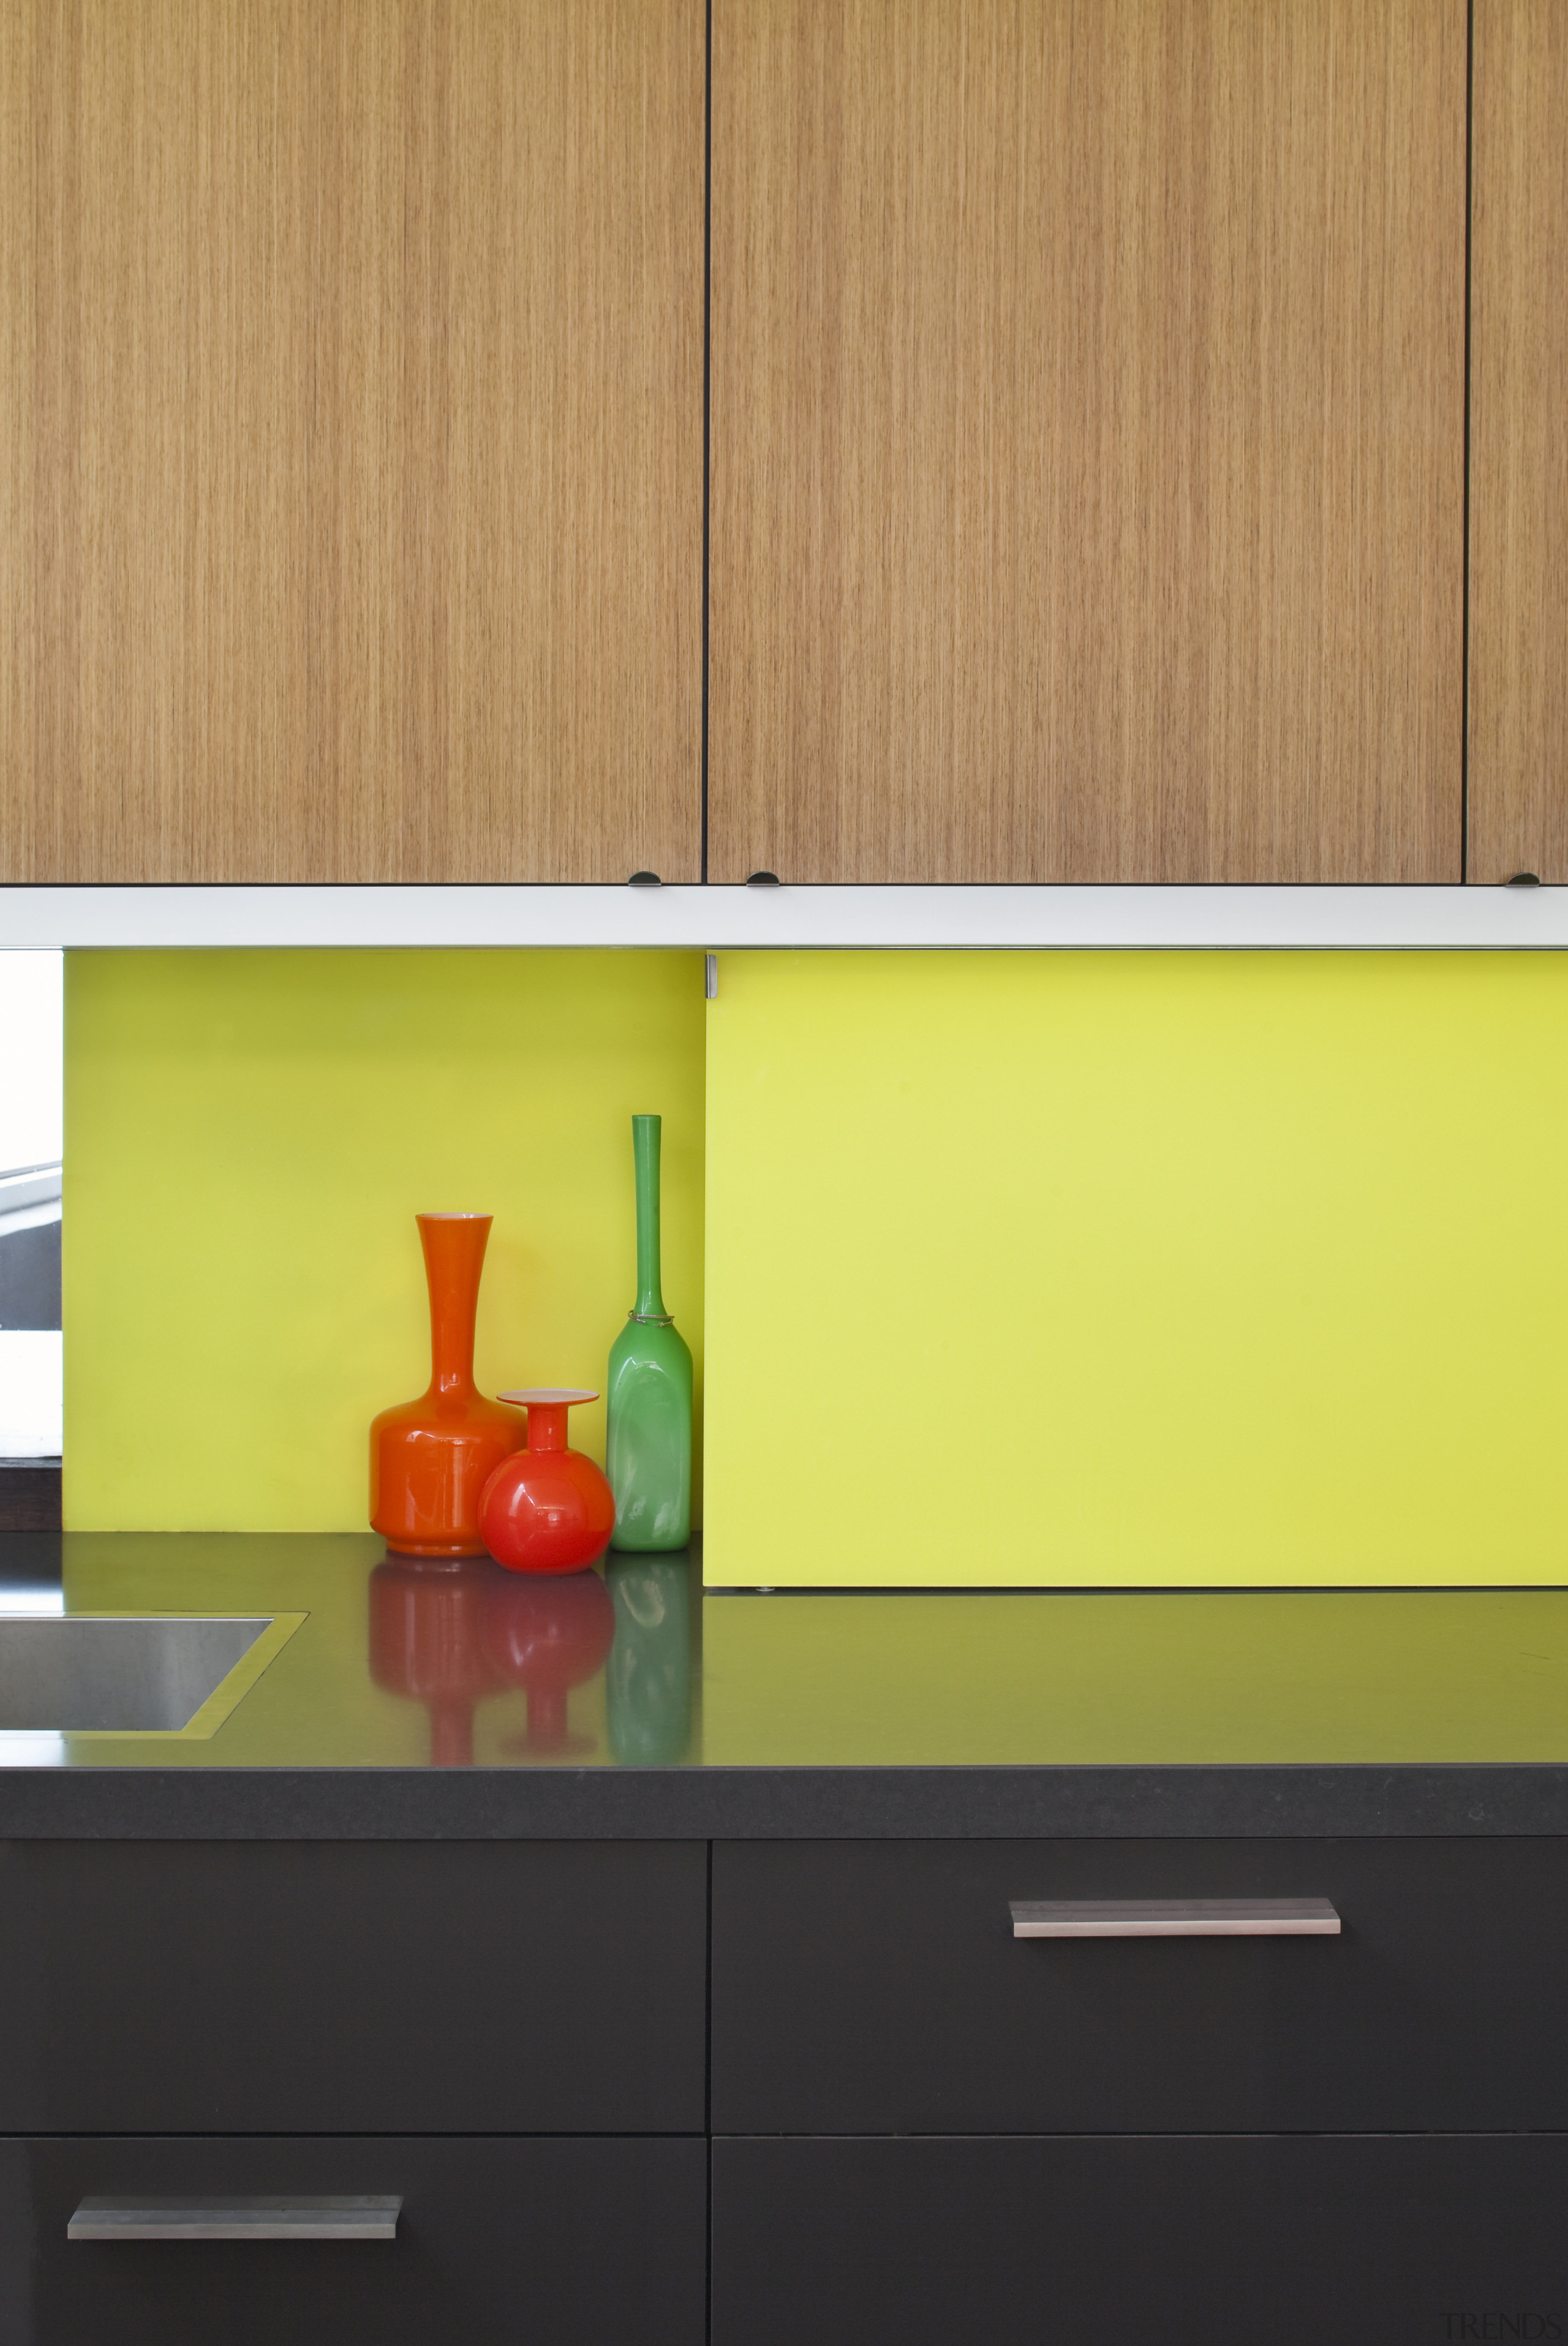 A bright yellow splashback is a feature of countertop, interior design, kitchen, orange, product design, shelf, shelving, table, wall, yellow, orange, yellow